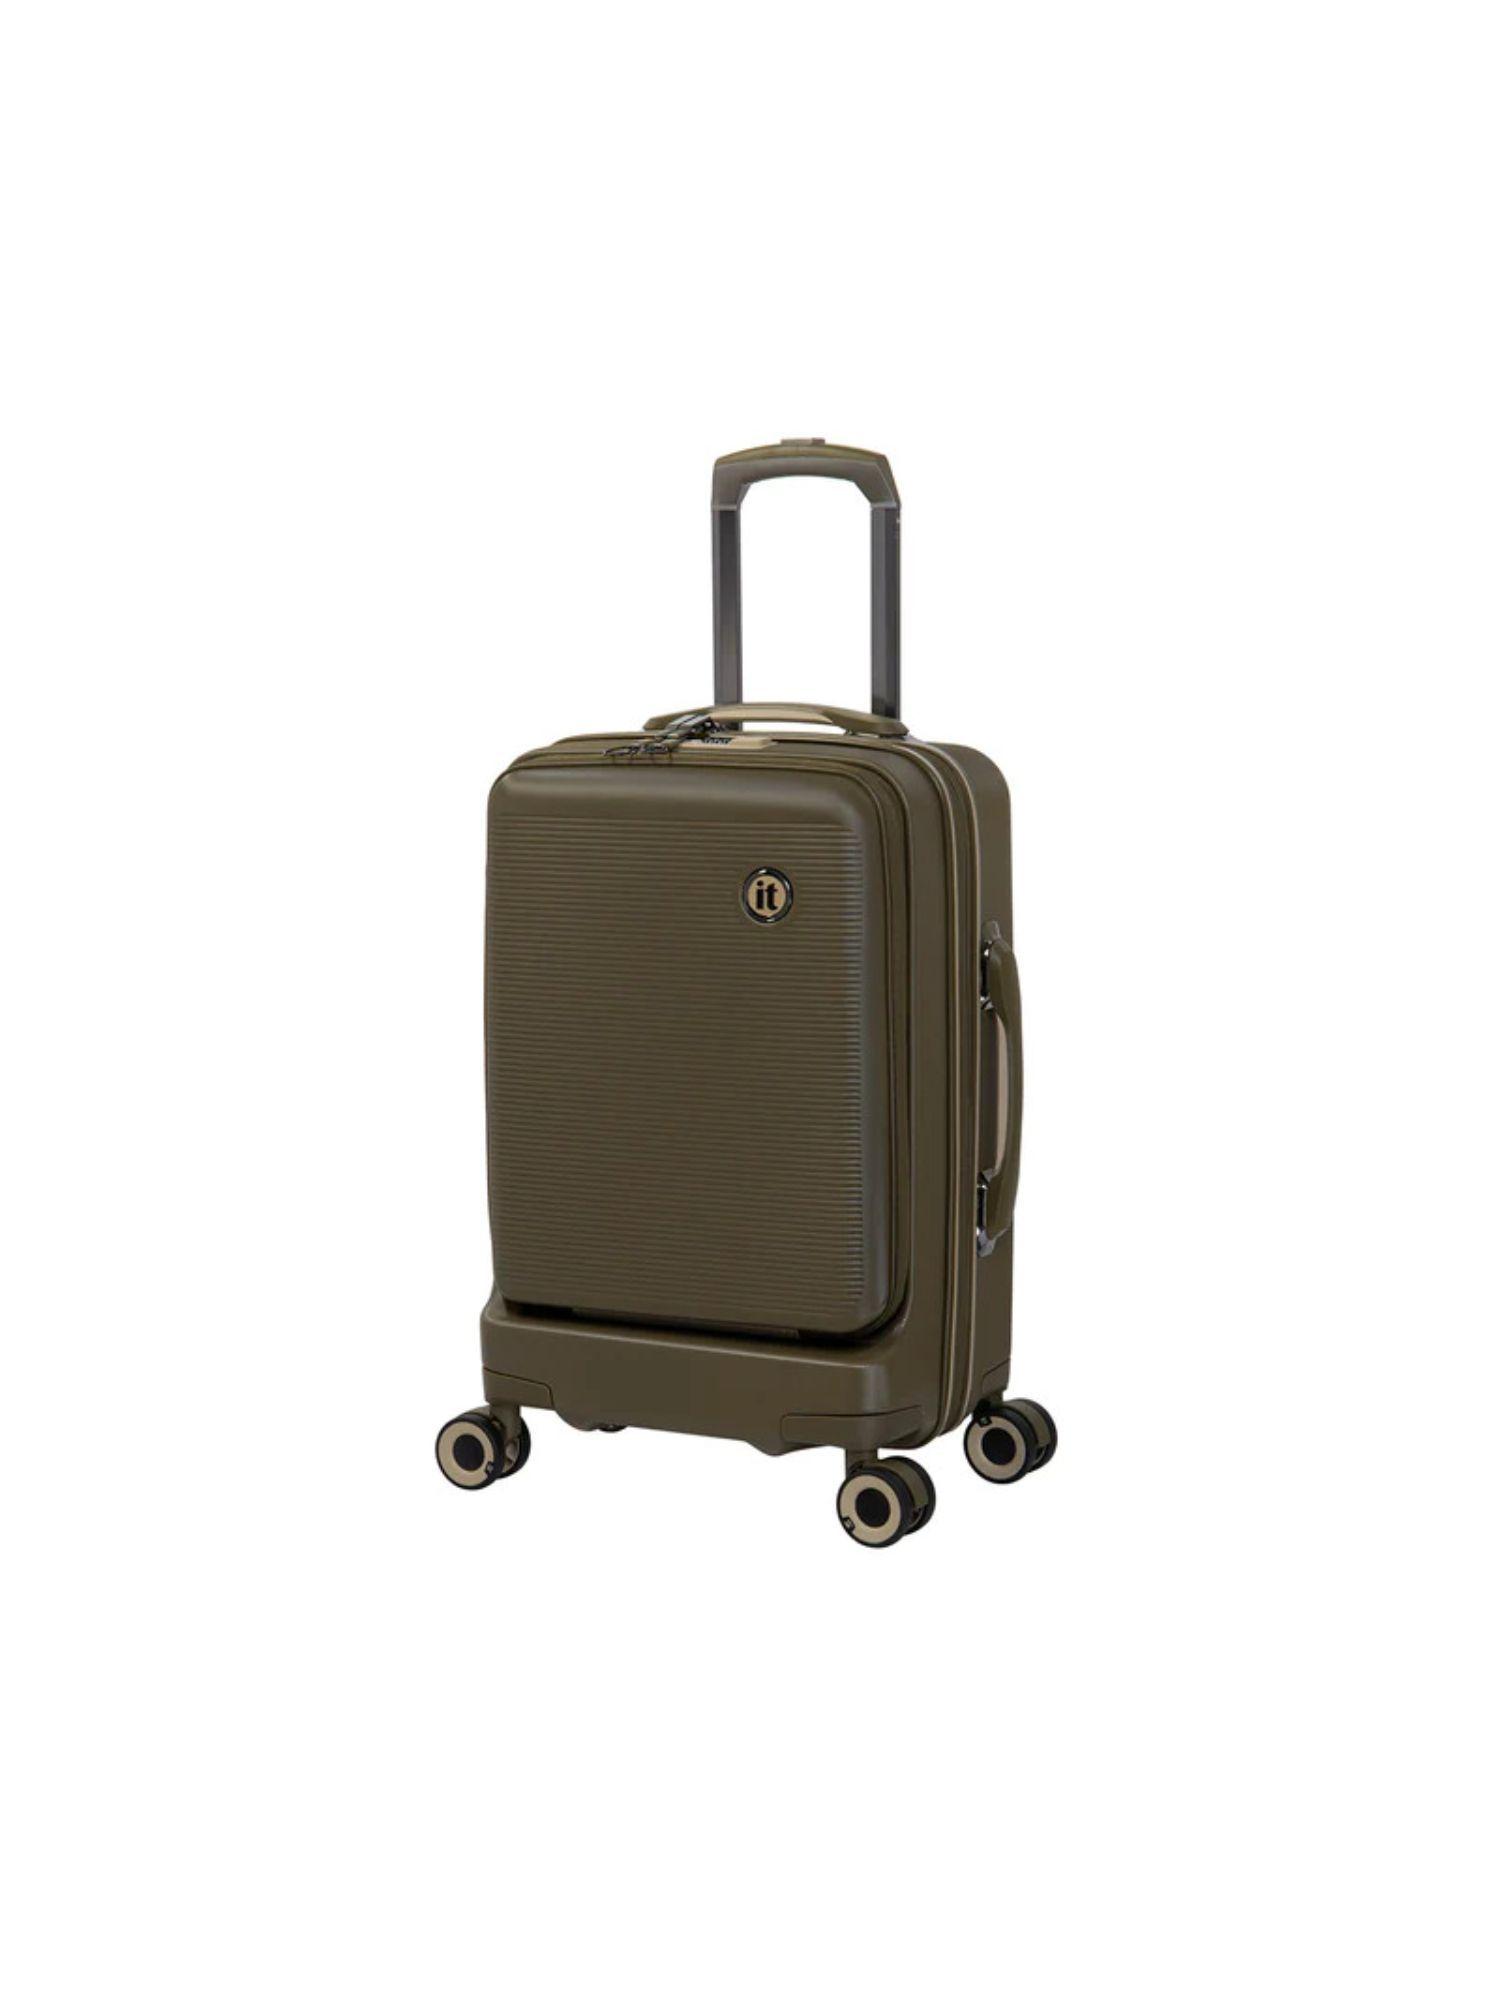 rapidity dark olive expandable trolley bag